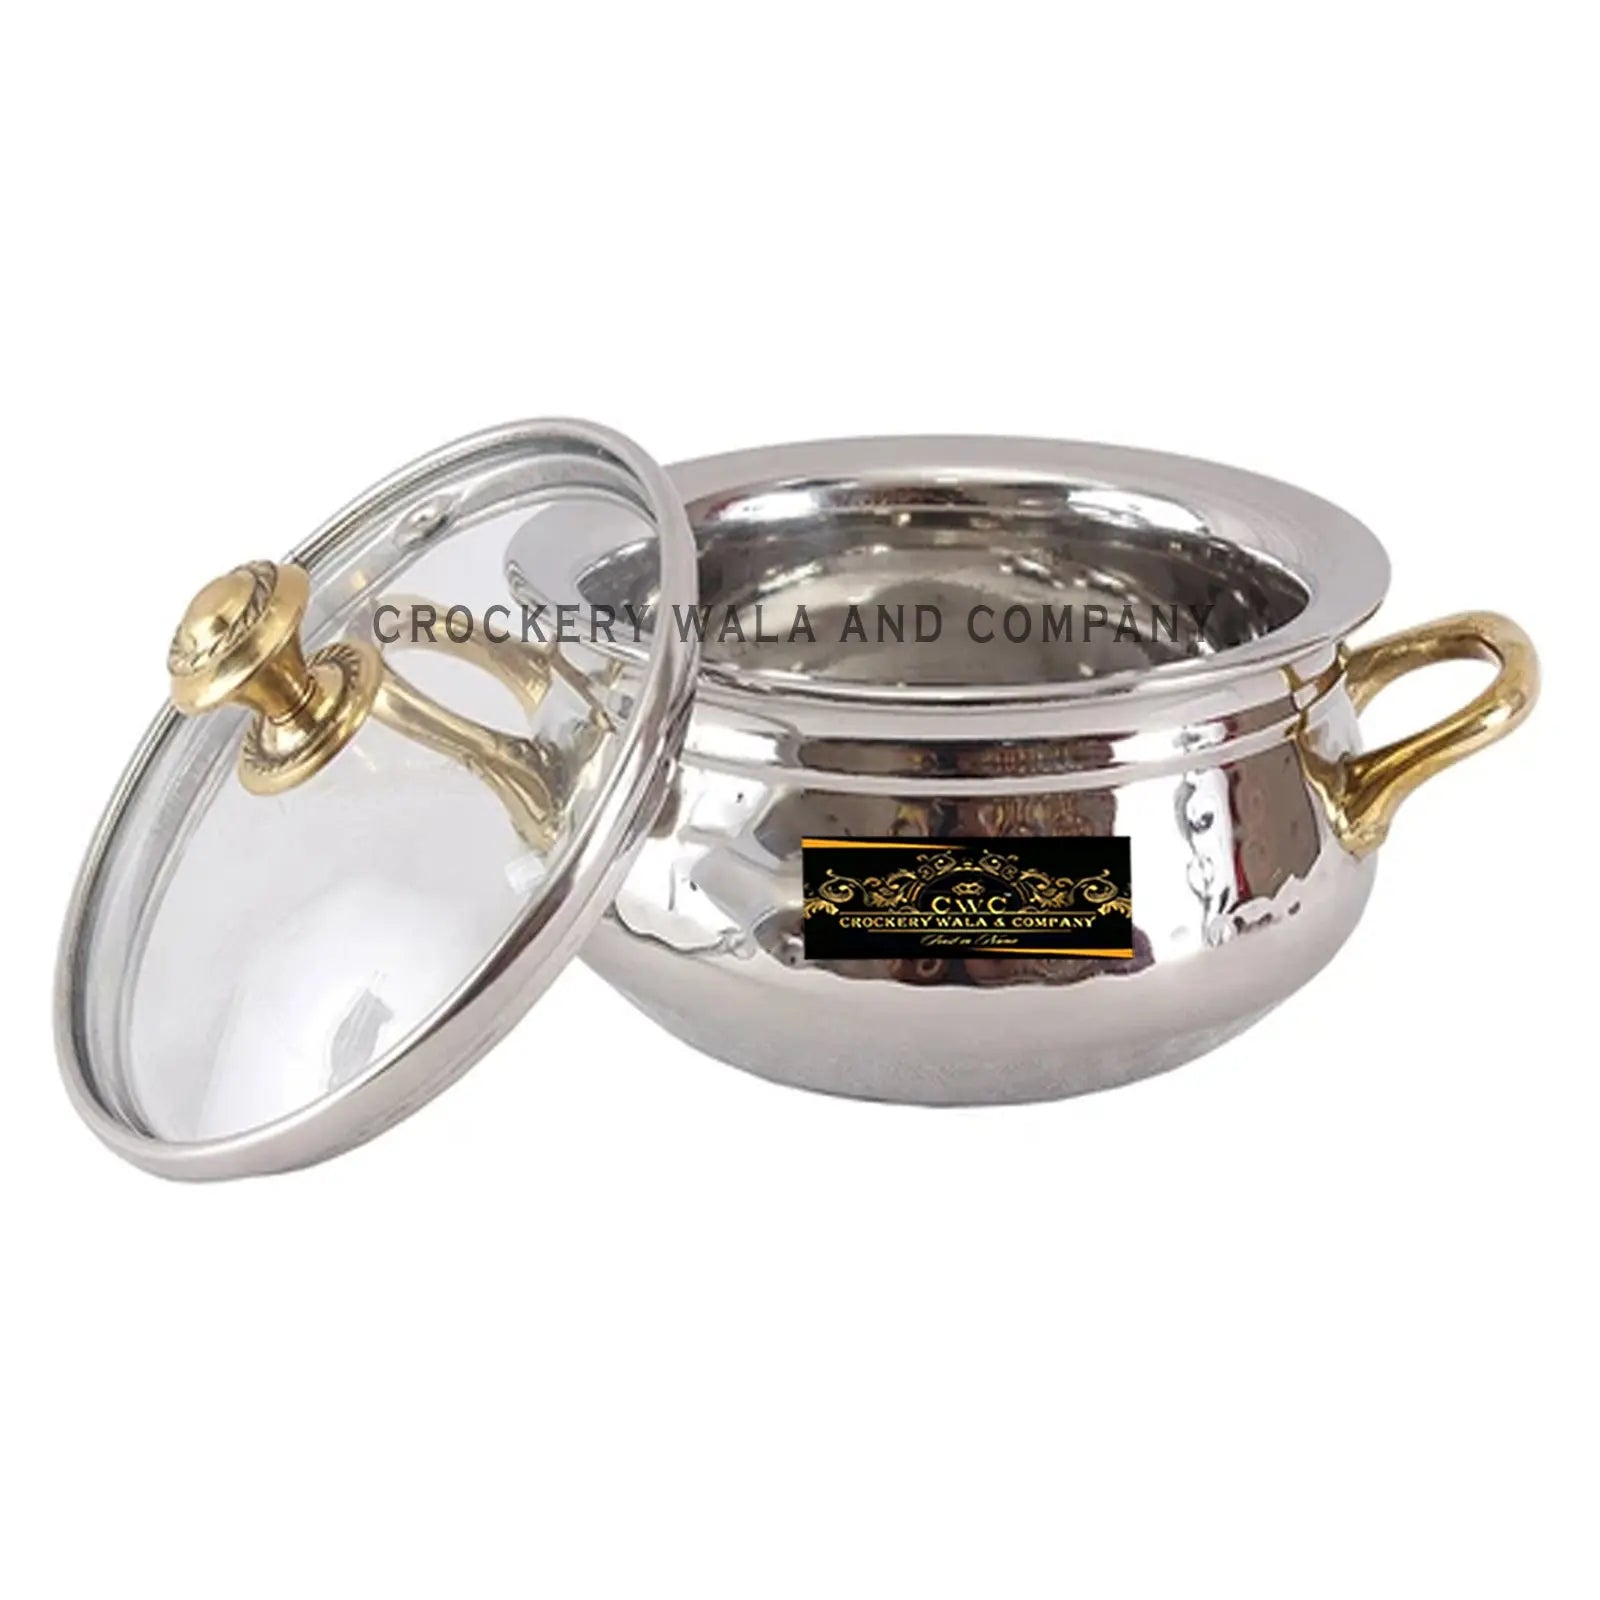 Crockery Wala And Company Steel Handi Hammered Stainless Steel Serving Handi With Glass Lid Brass Knob 350 ML - CROCKERY WALA AND COMPANY 